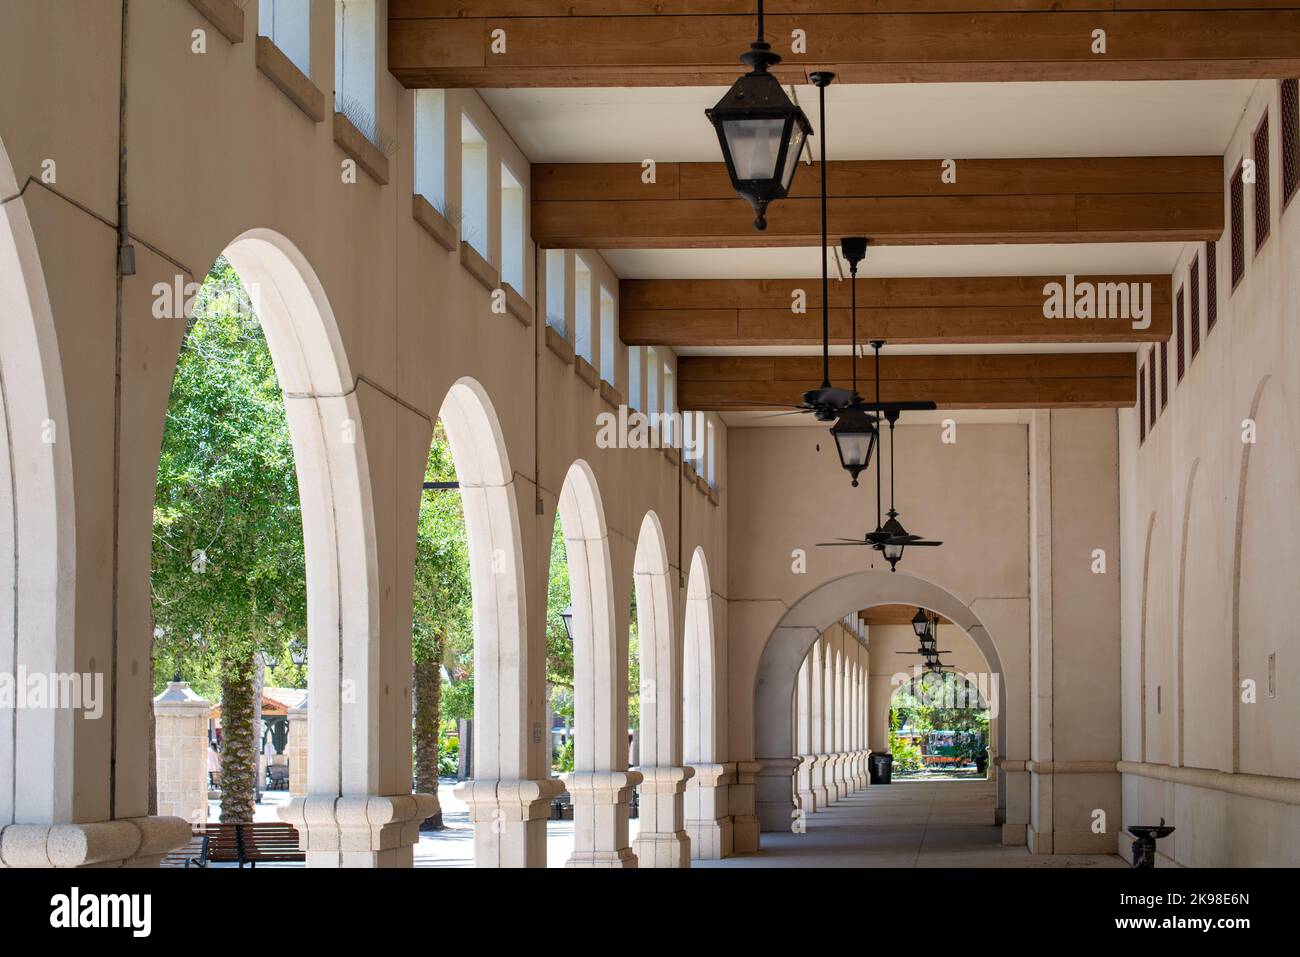 Lightner Museum, the historical white cement Spanish style colonnade has hanging black light fixtures and wooden beams with small windows over the Stock Photo